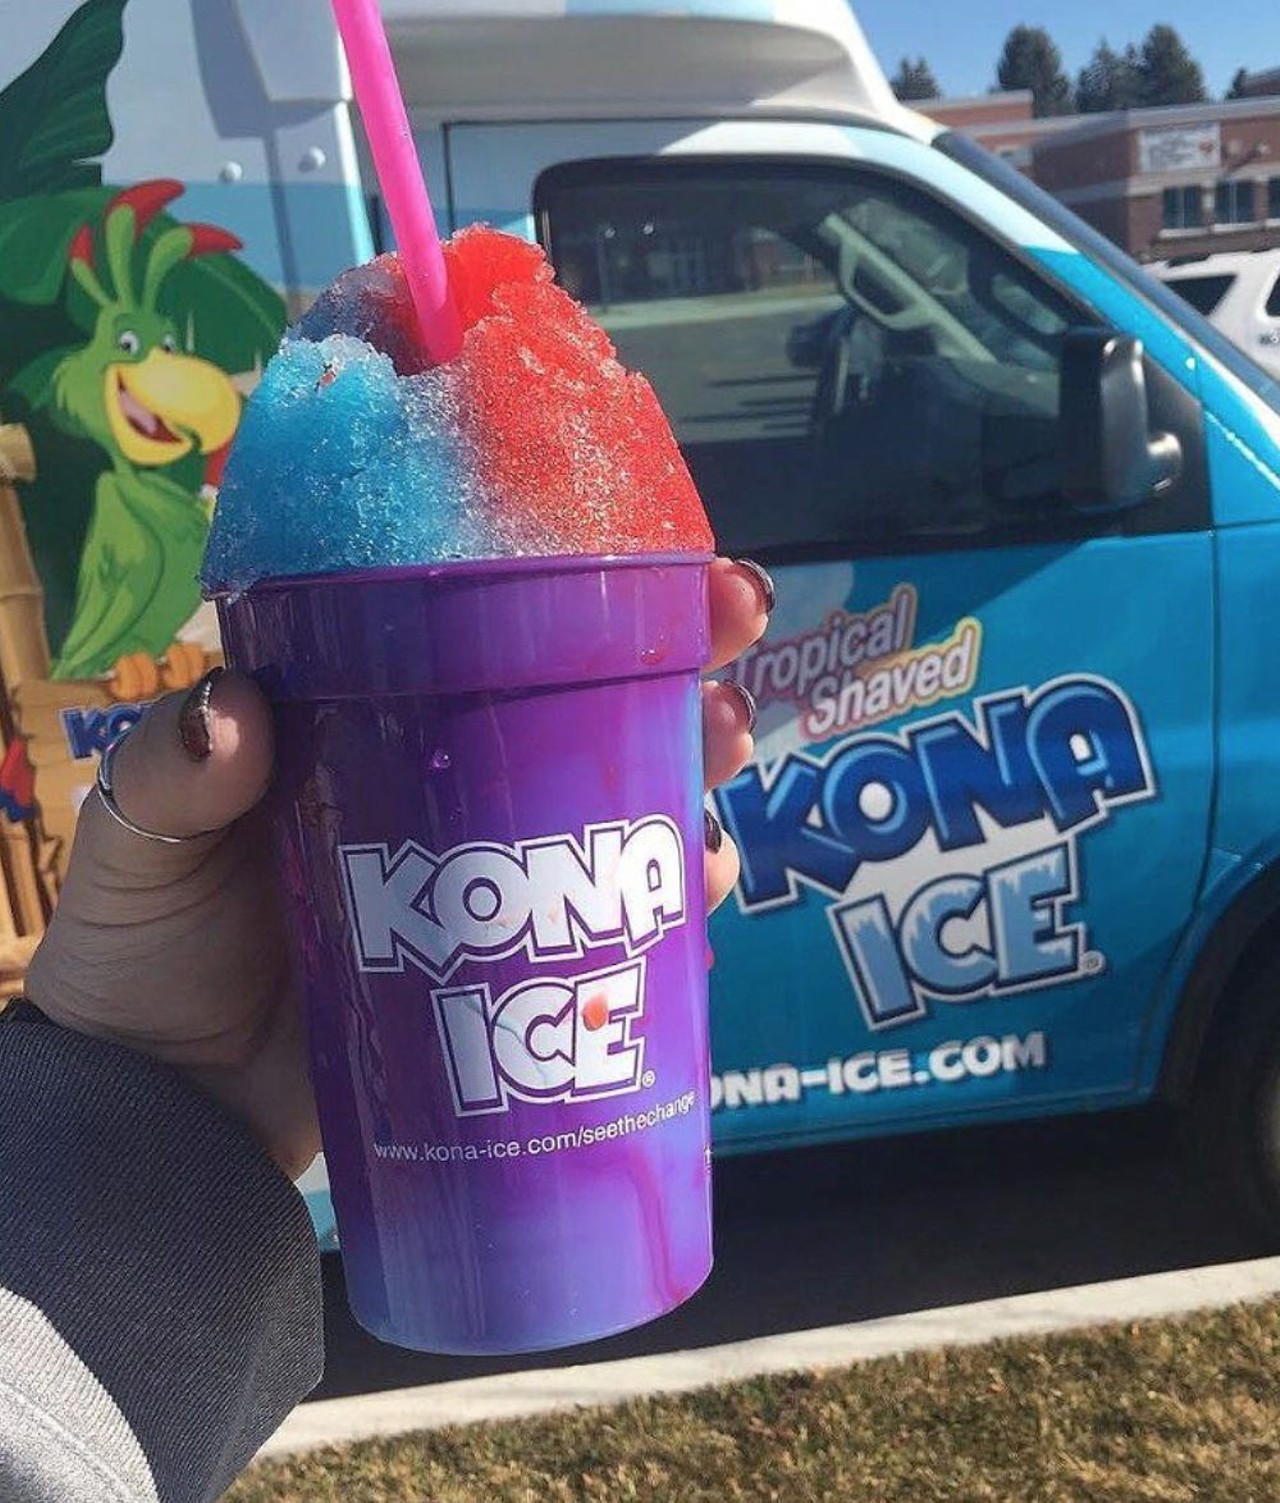  Kona Ice
216-543-5653
This Kona Ice truck is located in Brecksville and offers tons of shaved ice flavors.
Photo via krystn.m/Instagram